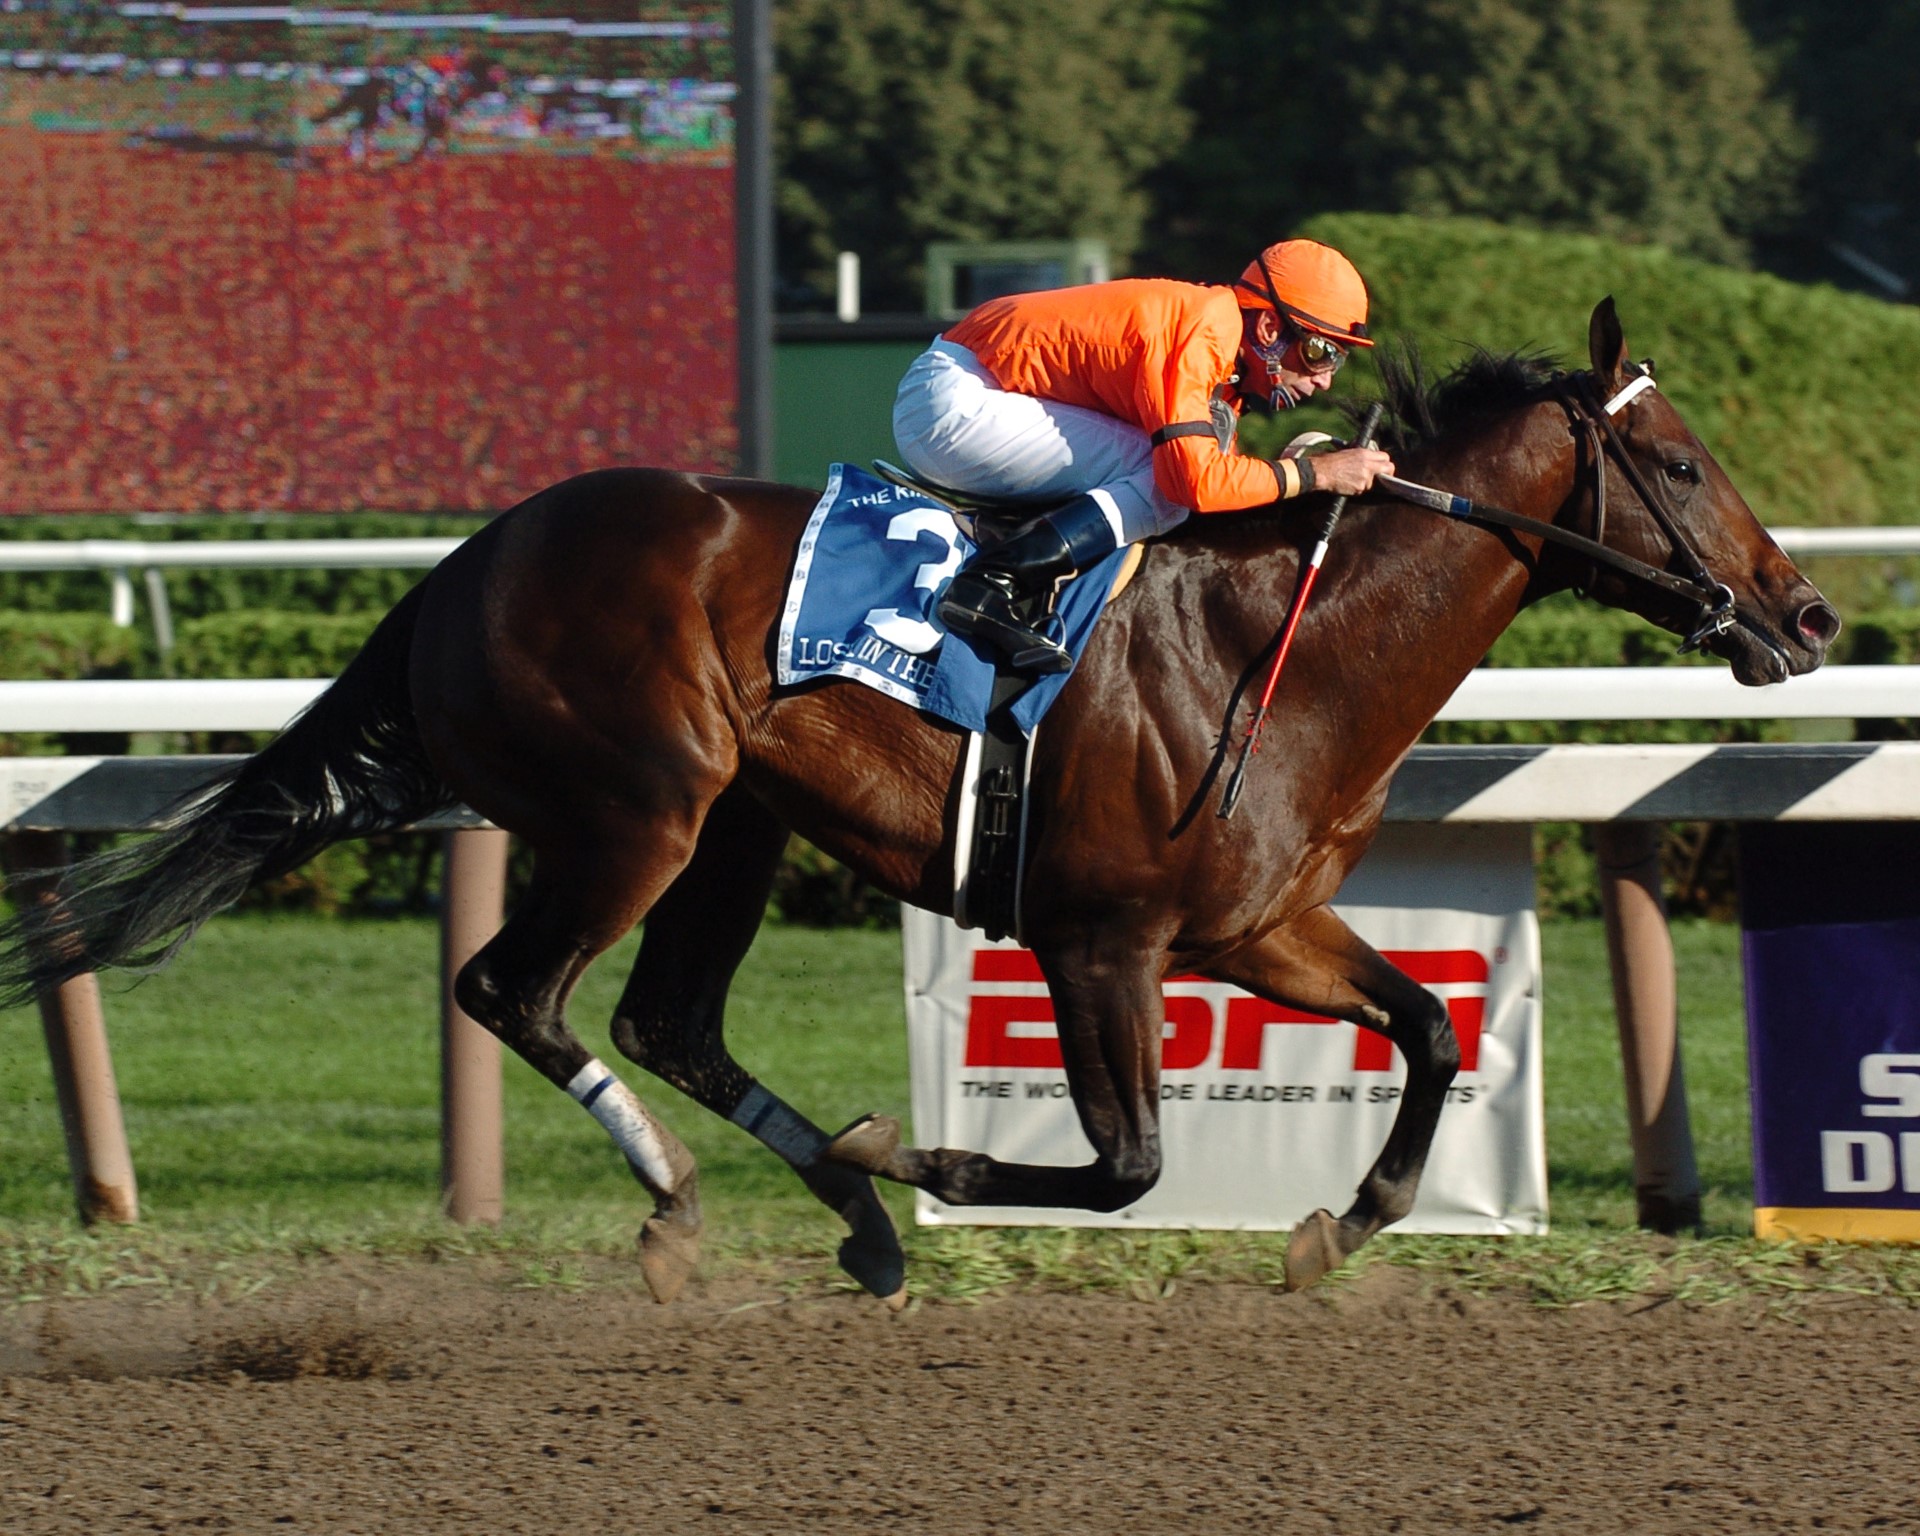 Russell Baze and Lost in the Fog winning the Grade 1 King's Bishop Stakes at Saratoga in 2005 (courtesy Coglianese Photo)